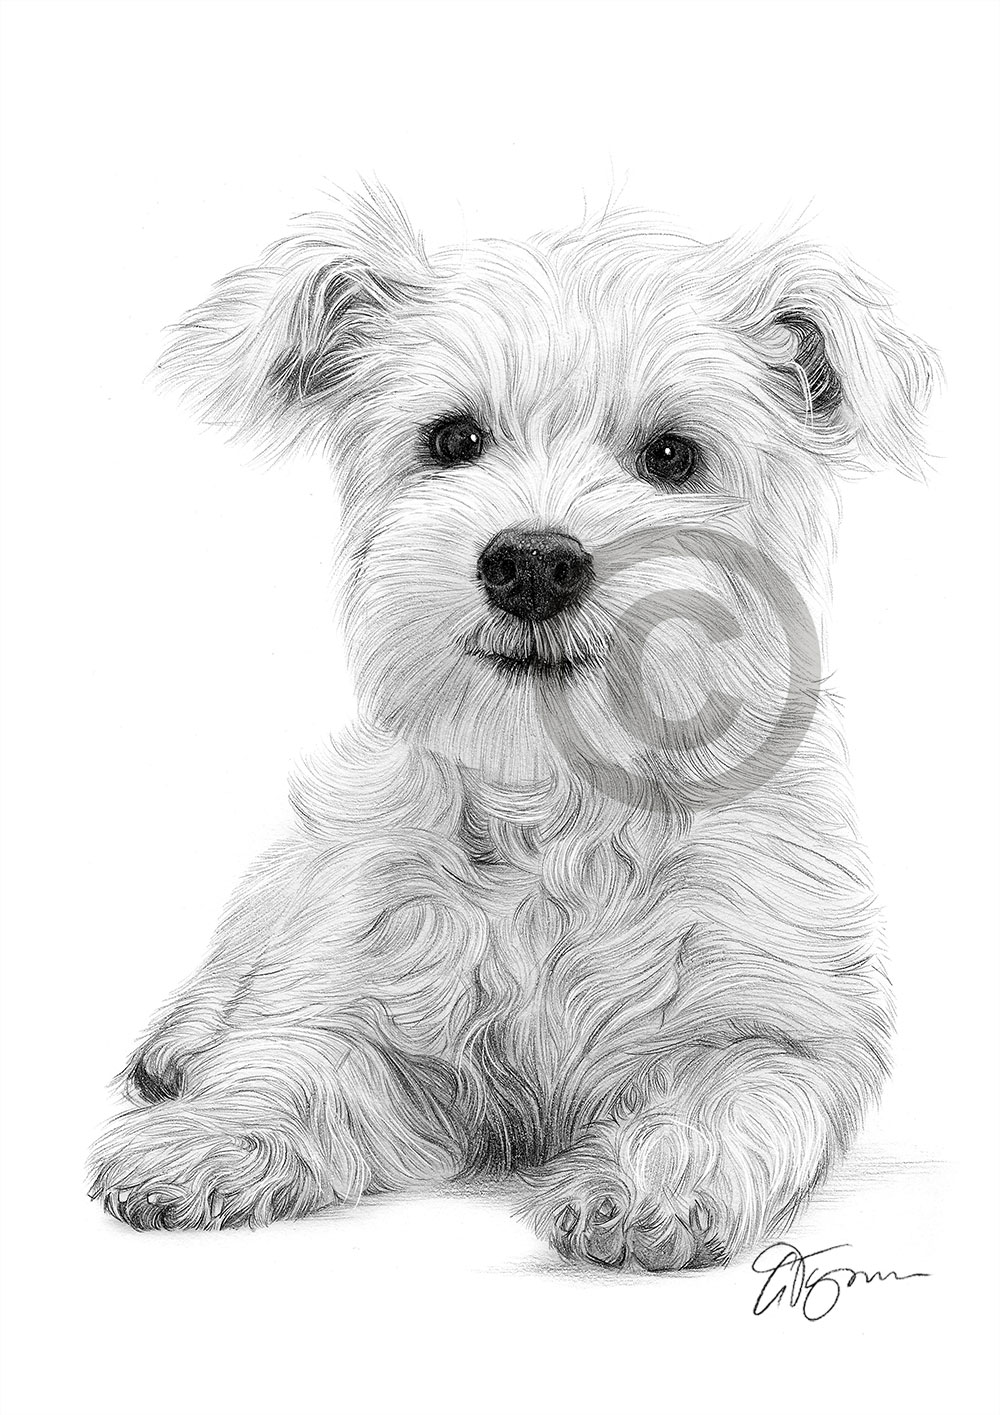 Pencil drawing of a West Highland White Terrier puppy by artist Gary Tymon